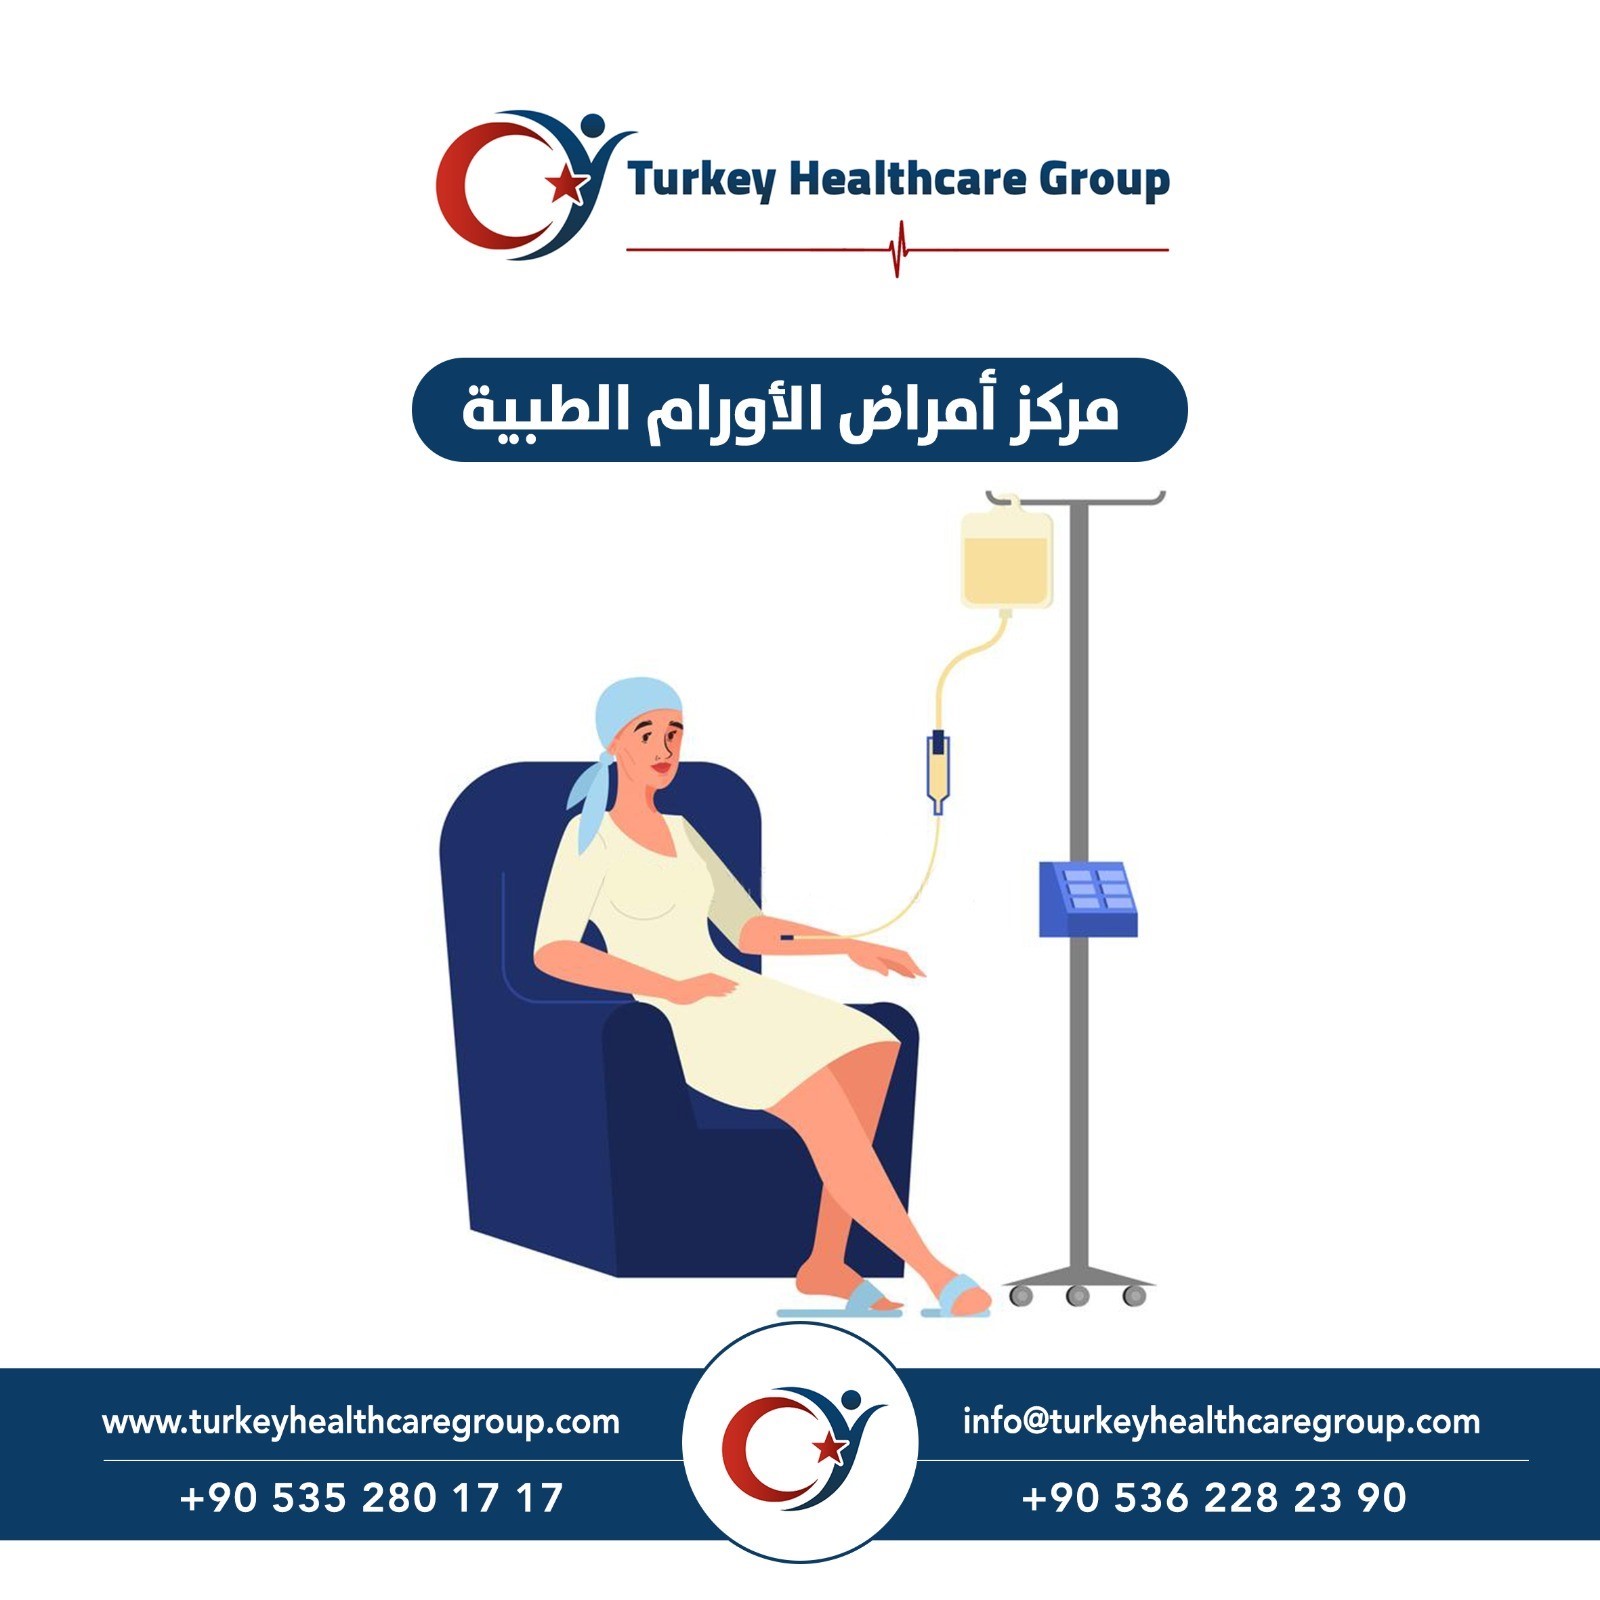 Specialized Hospital in the Diagnosis and Treatment of Breast Tumors